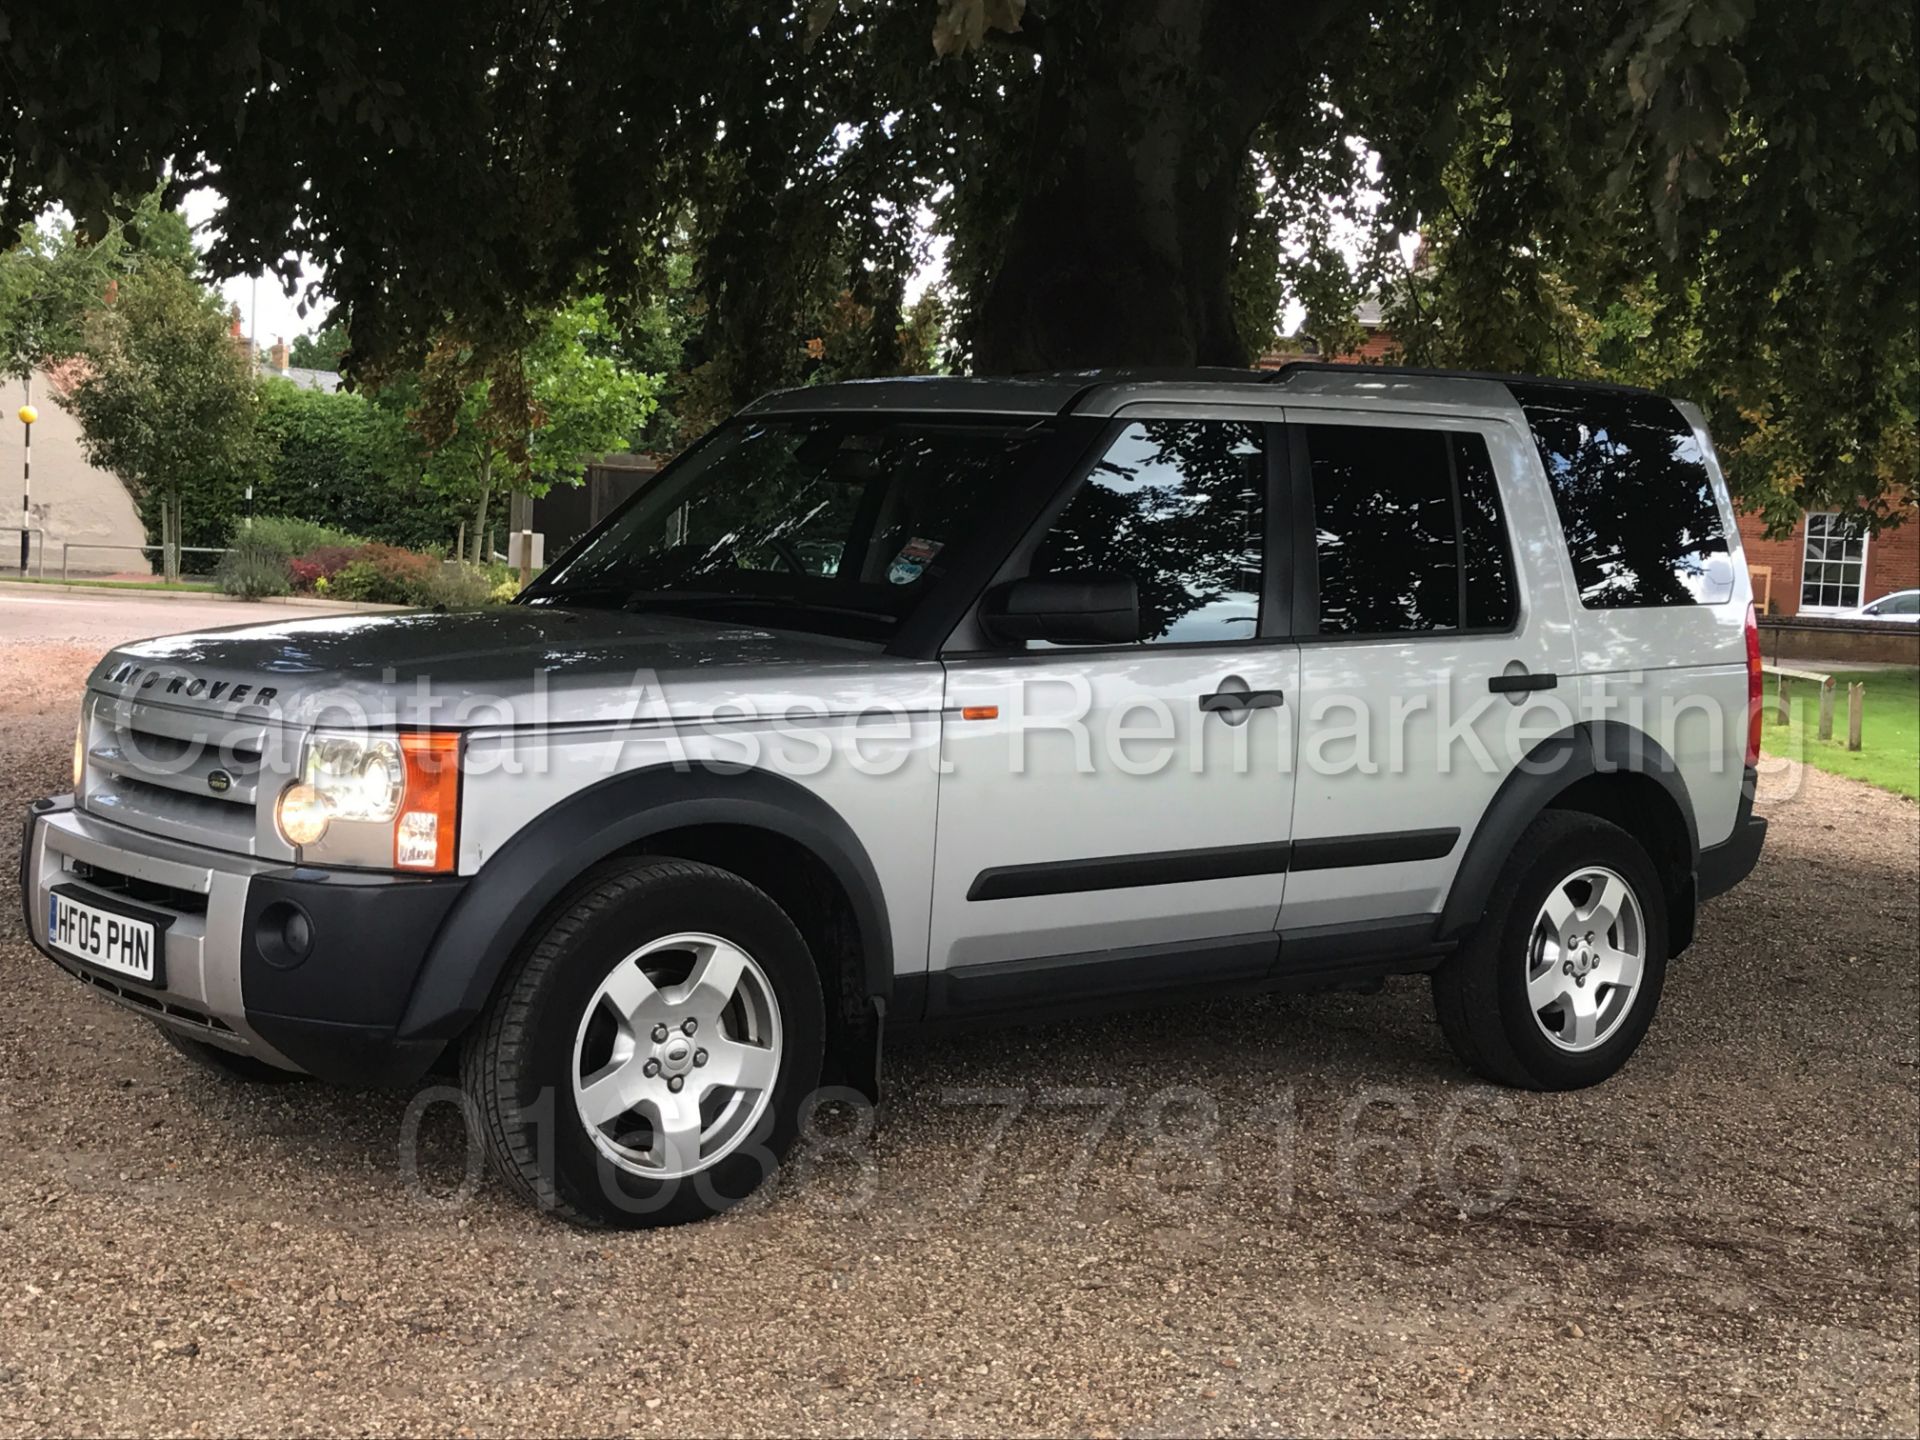 (On Sale) LAND ROVER DISCOVERY 3 (2005 - FACELIFT MODEL) 'TDV6 - AUTO - 7 SEATER - SAT NAV' (NO VAT) - Image 6 of 36